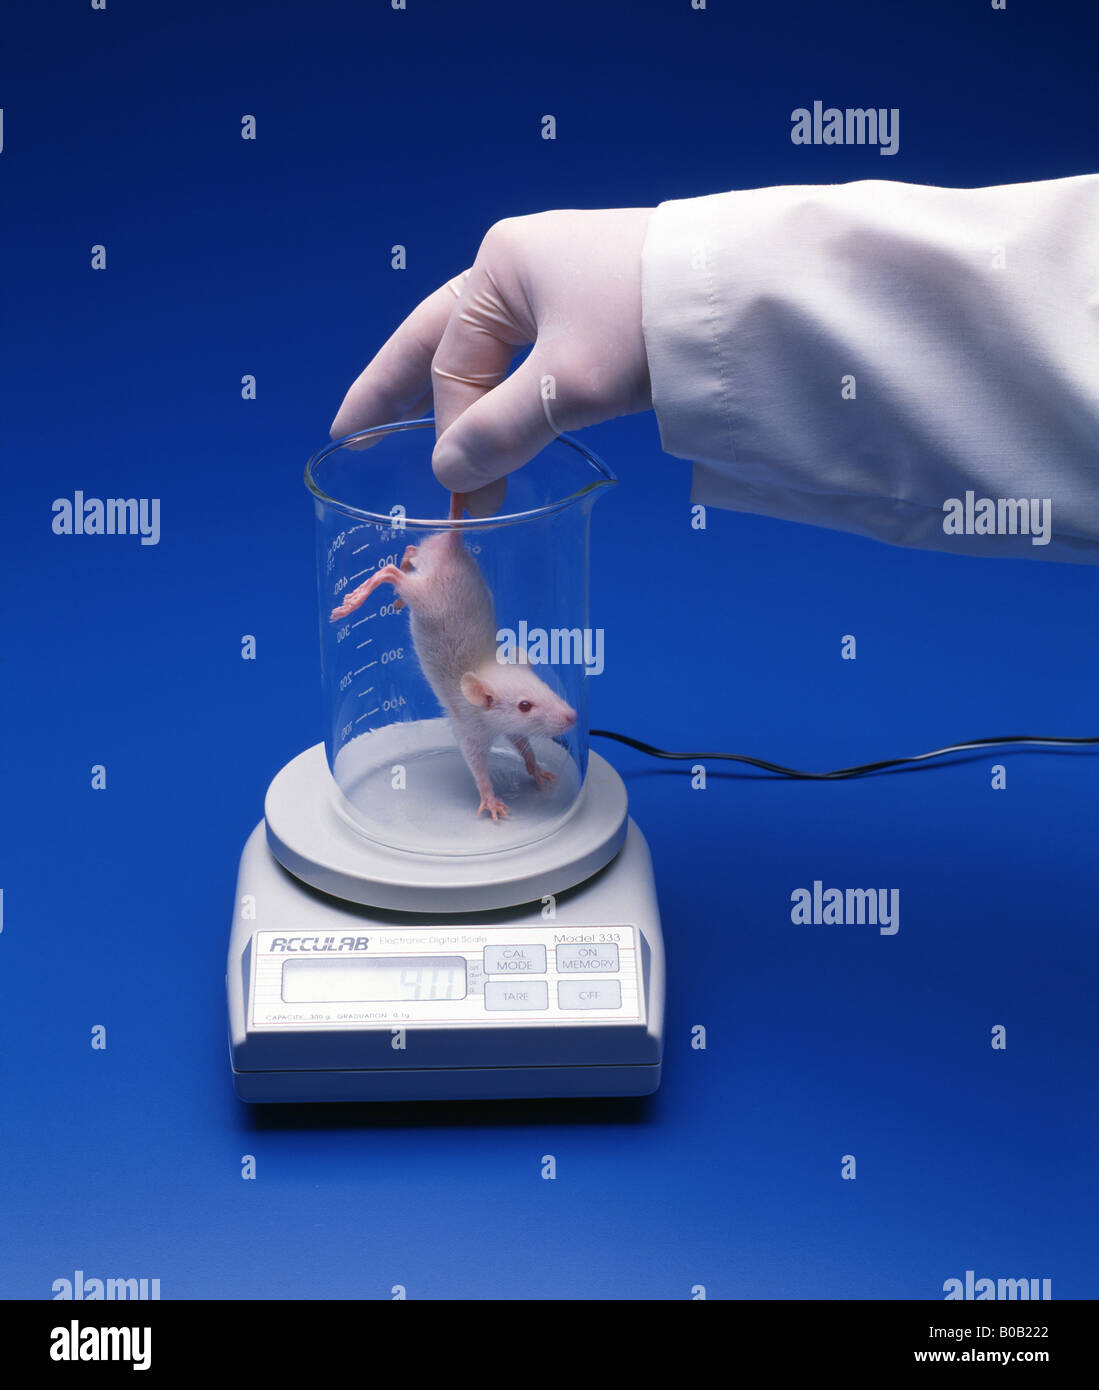 LAB TECHNICIAN USING ELECTRONIC DIGITAL SCALE TO WEIGH DIETARY RAT Stock Photo